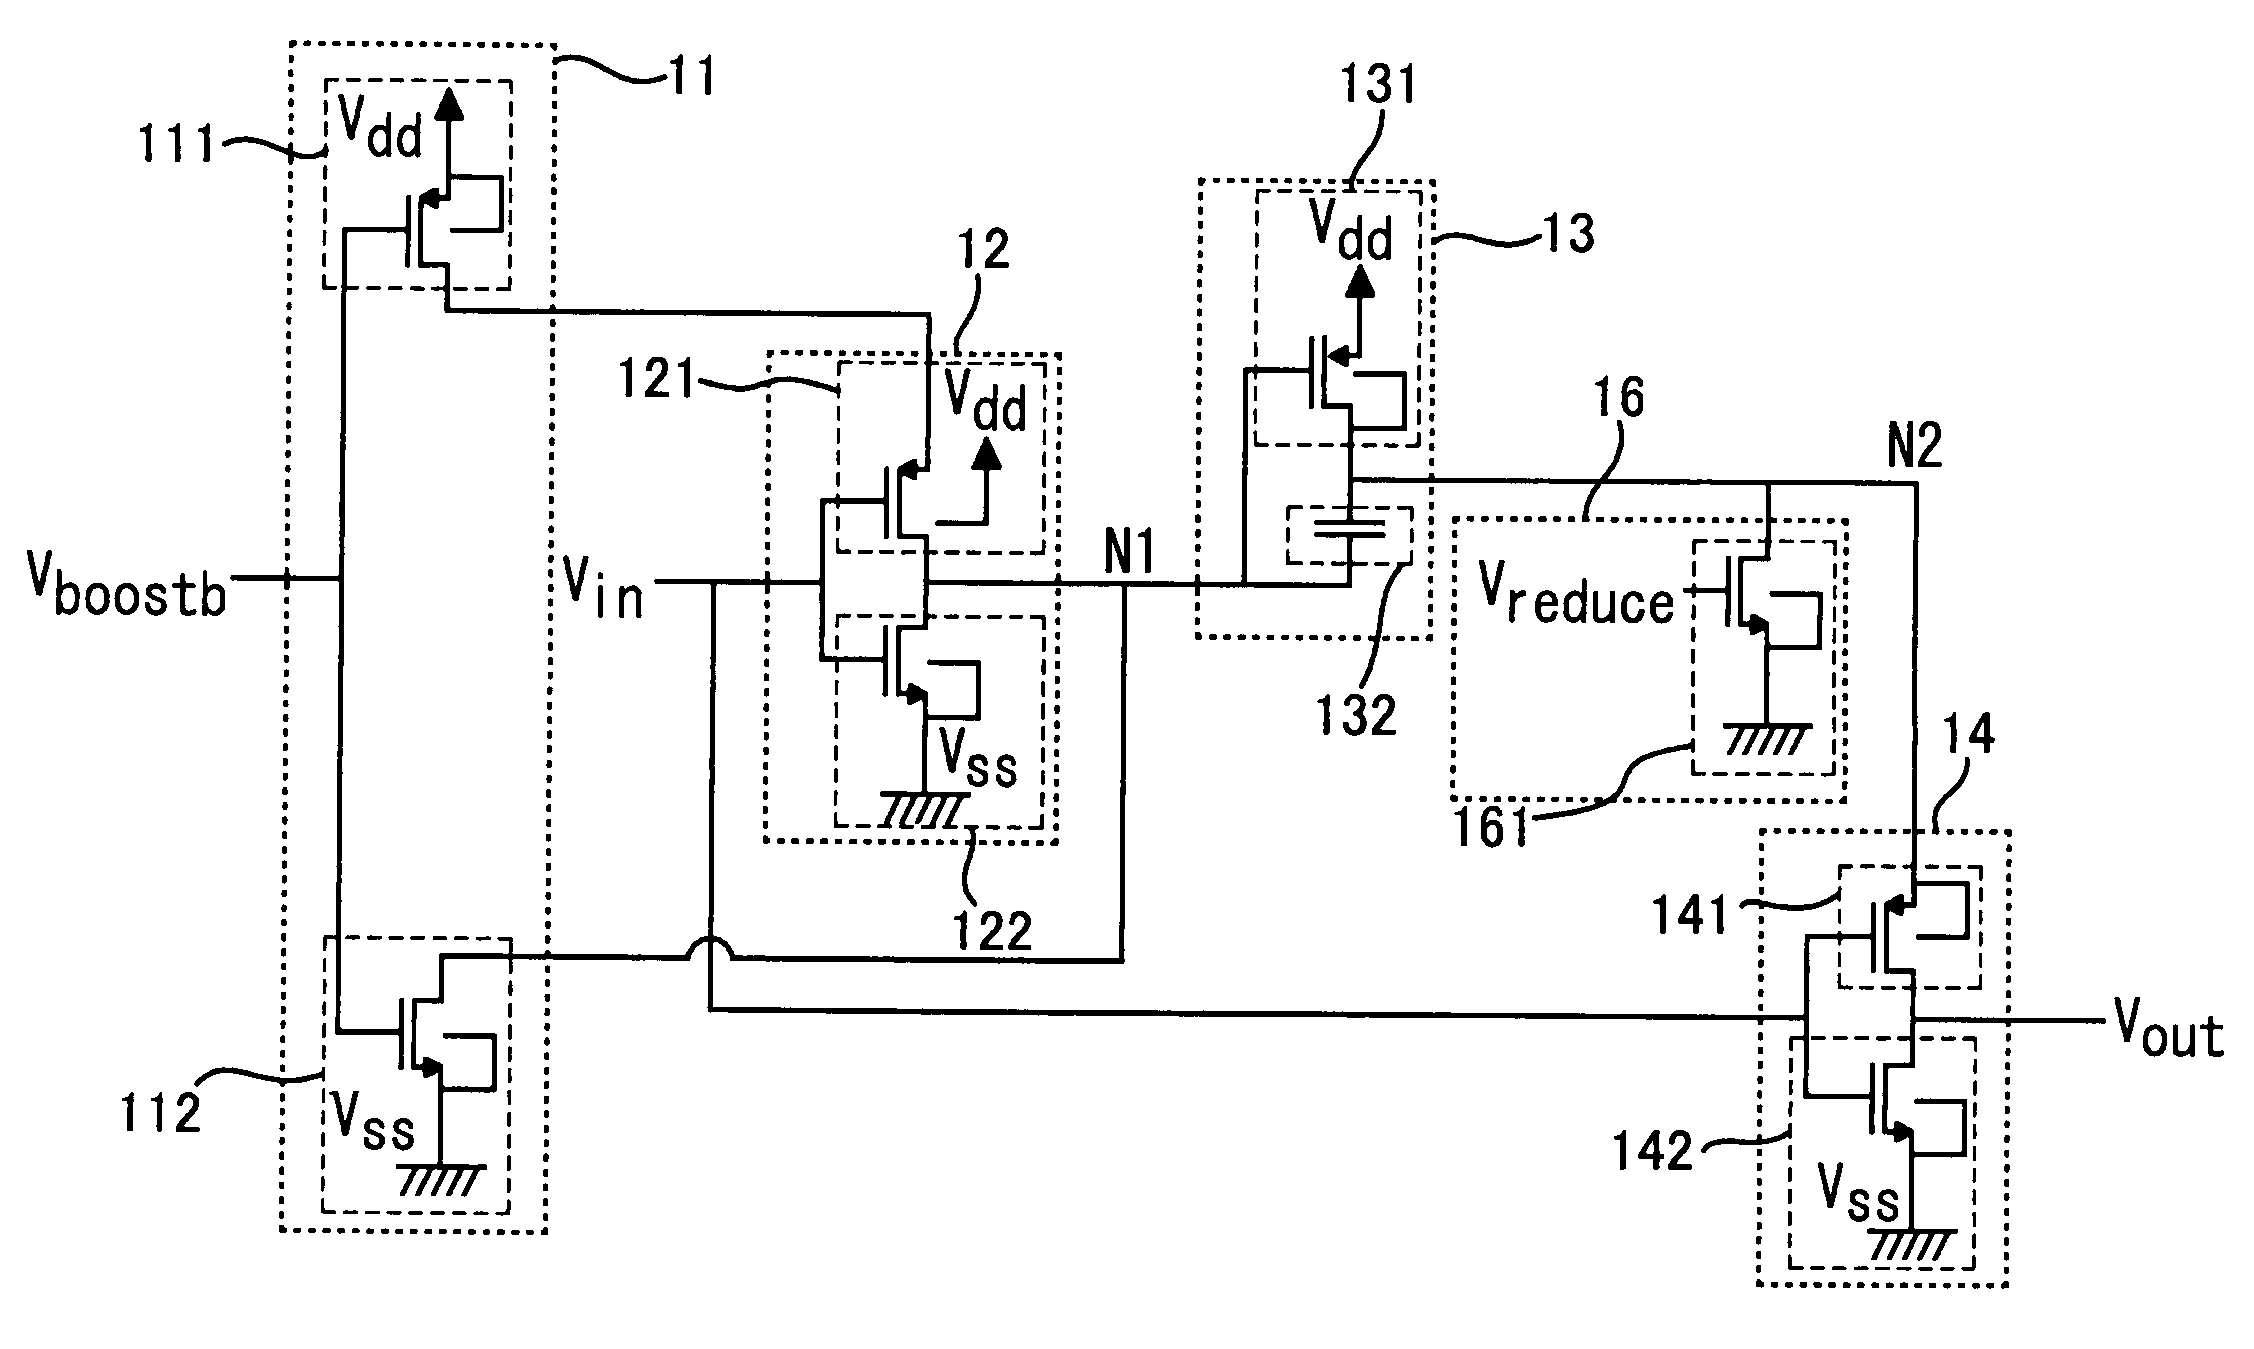 Semiconductor circuit apparatus with voltage boost